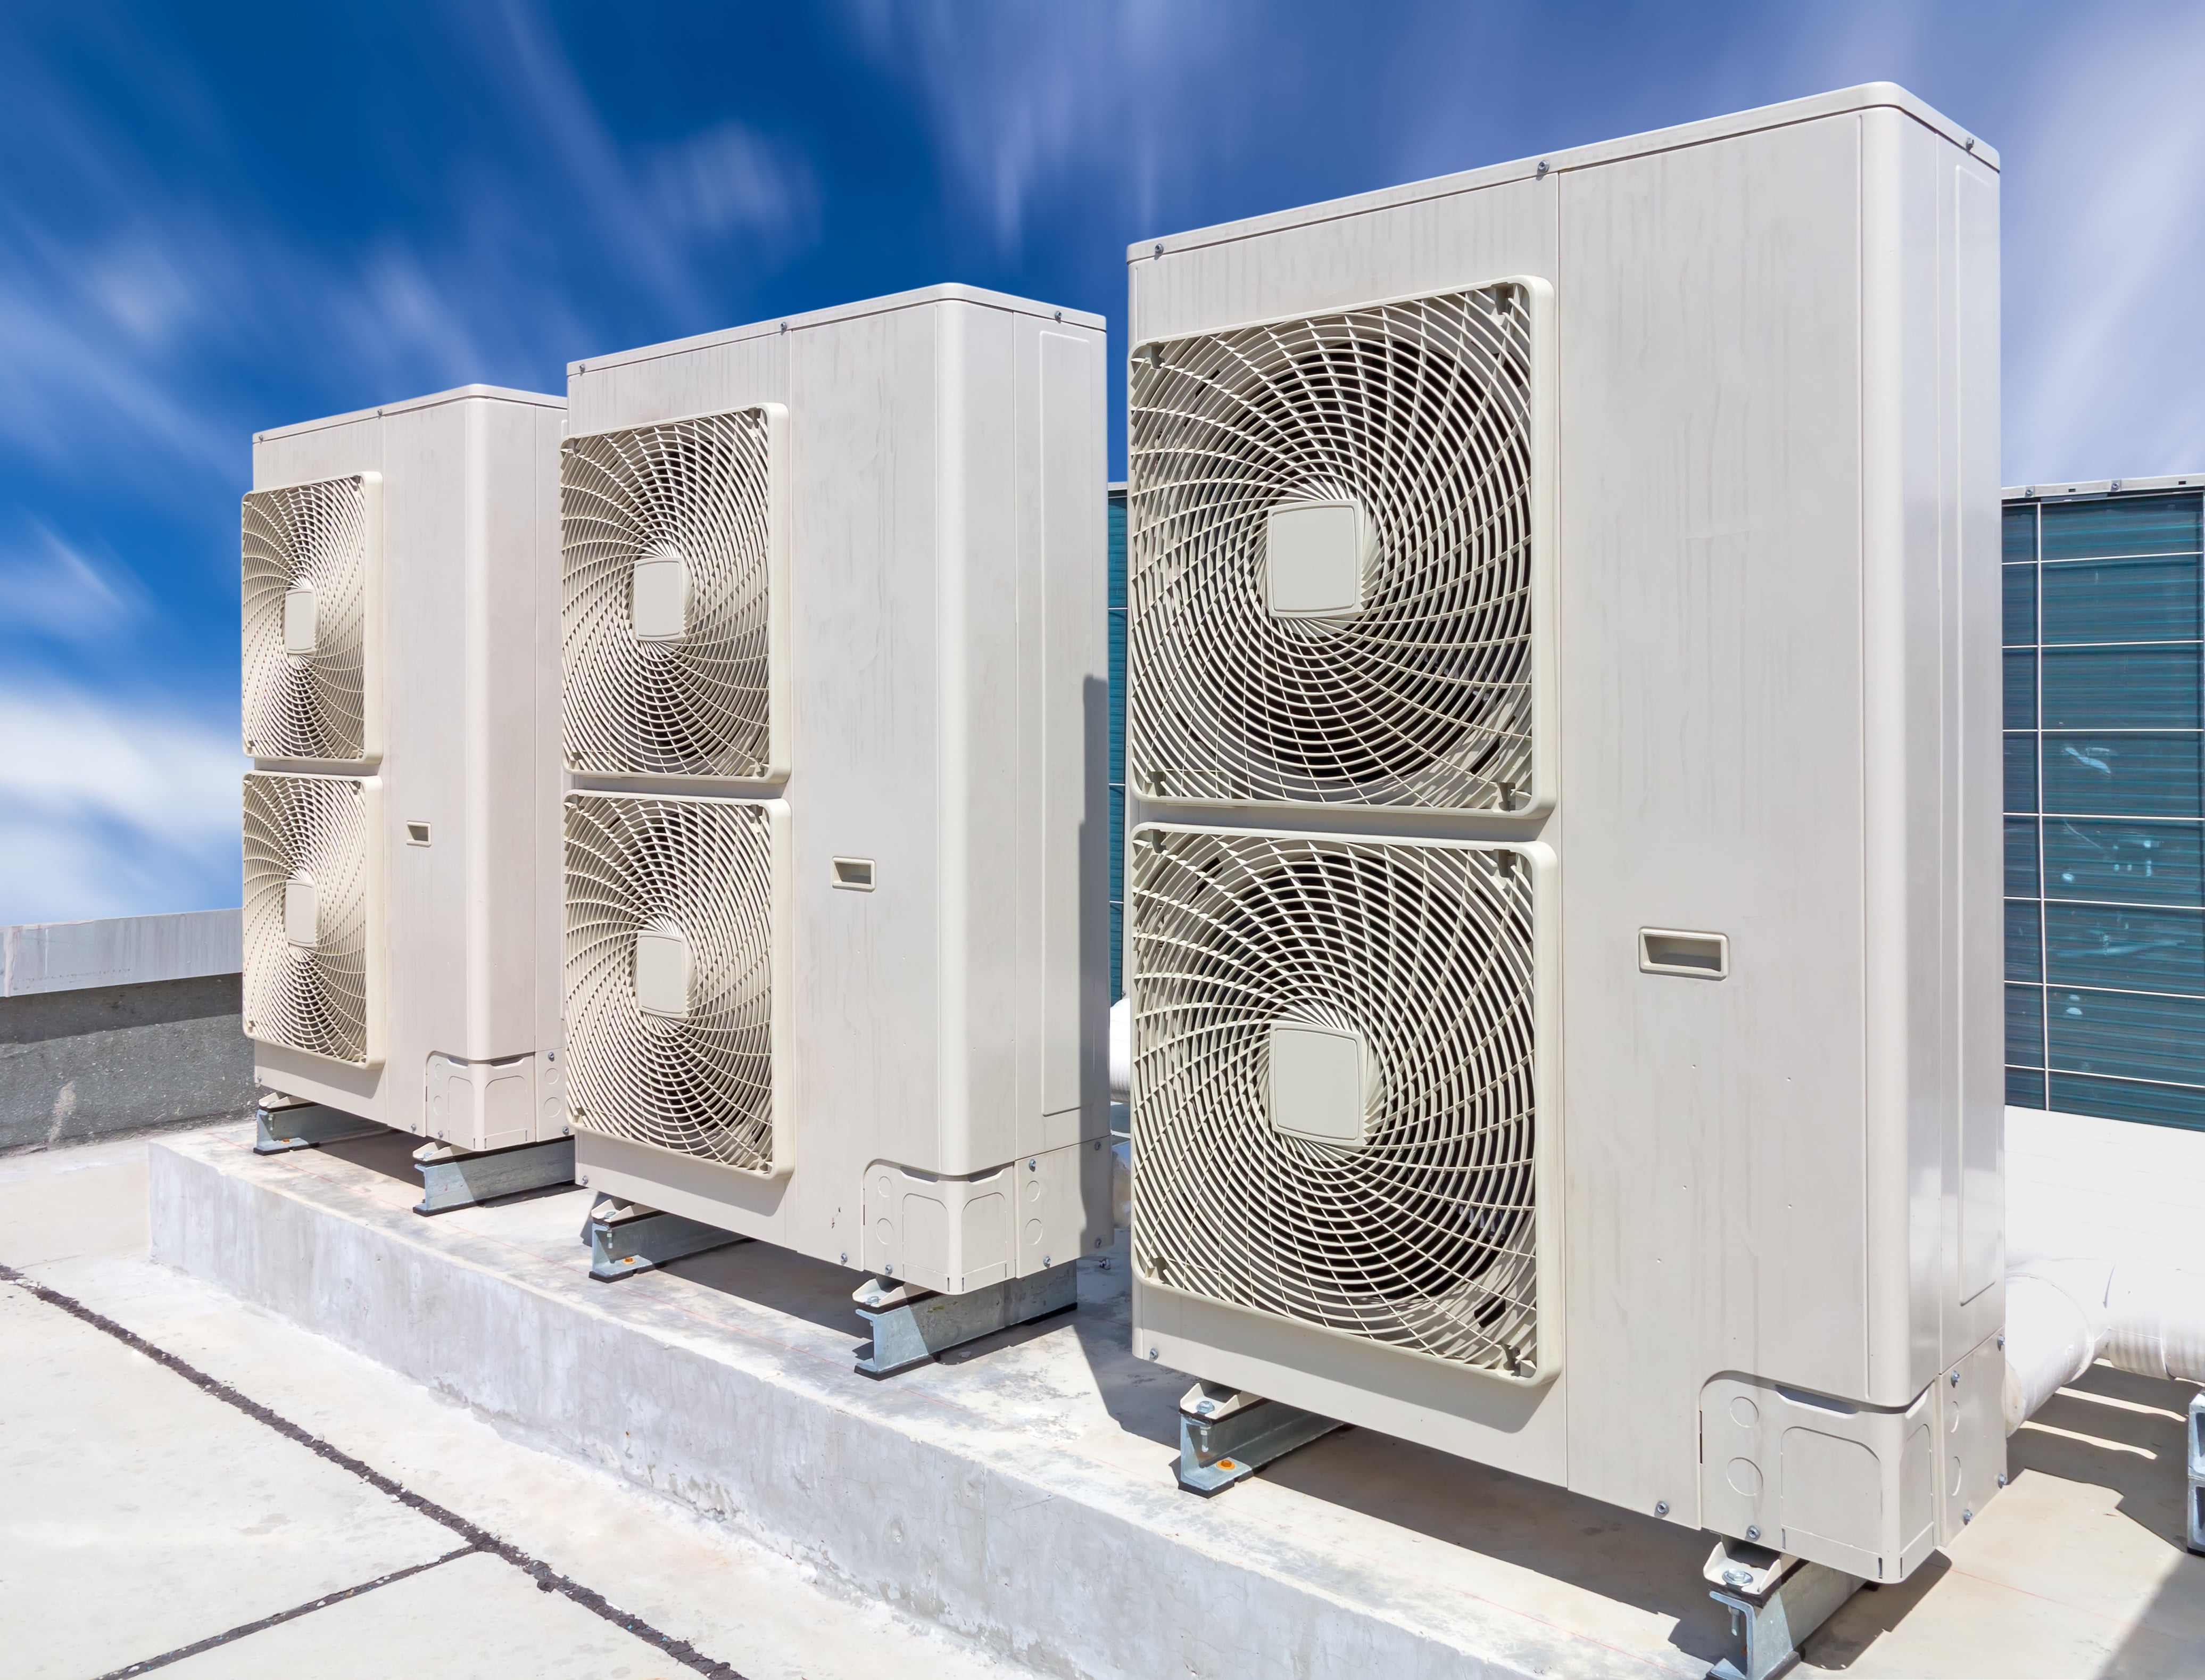 Three large industrial HVAC units installed on a rooftop, featuring white casing and large fan grills, set against a clear blue sky.